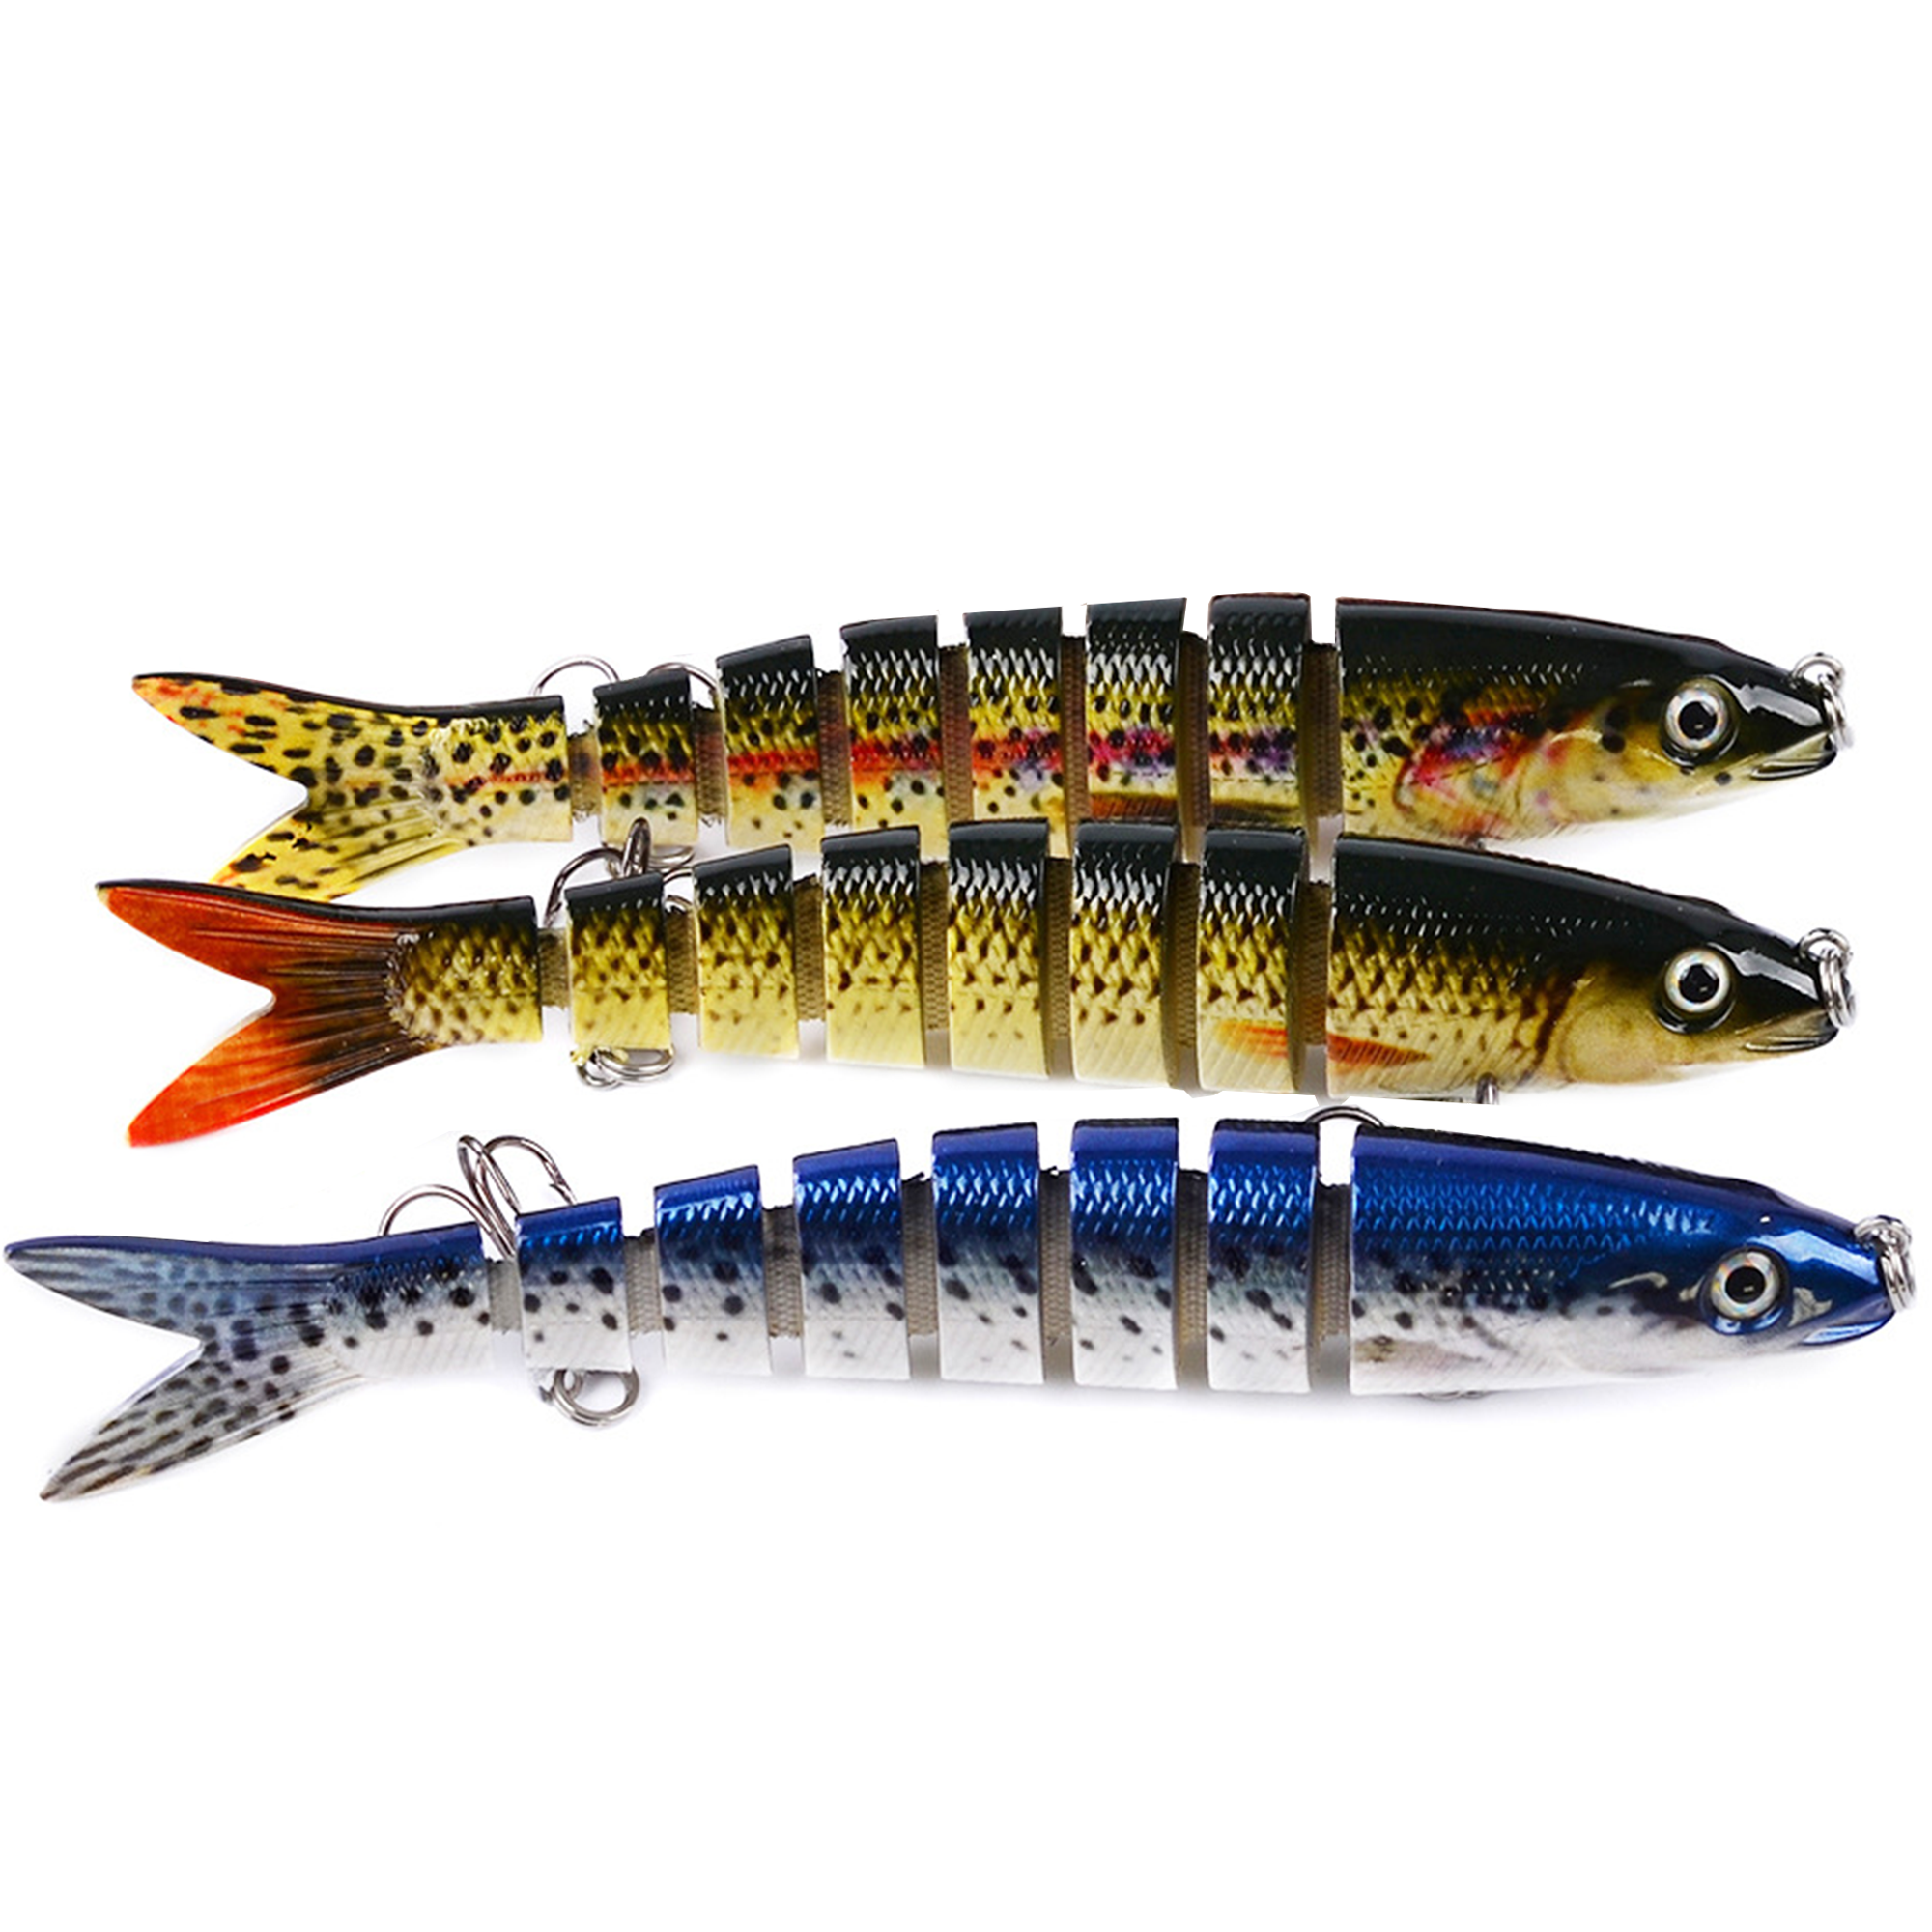  Bass Fishing Lures Set, Multi-Jointed and Floating Pencil Fishing  Lures for Freshwater, Catch Bigger Fish with Slow Sinking Bionic Swimming  Lures Saltwater